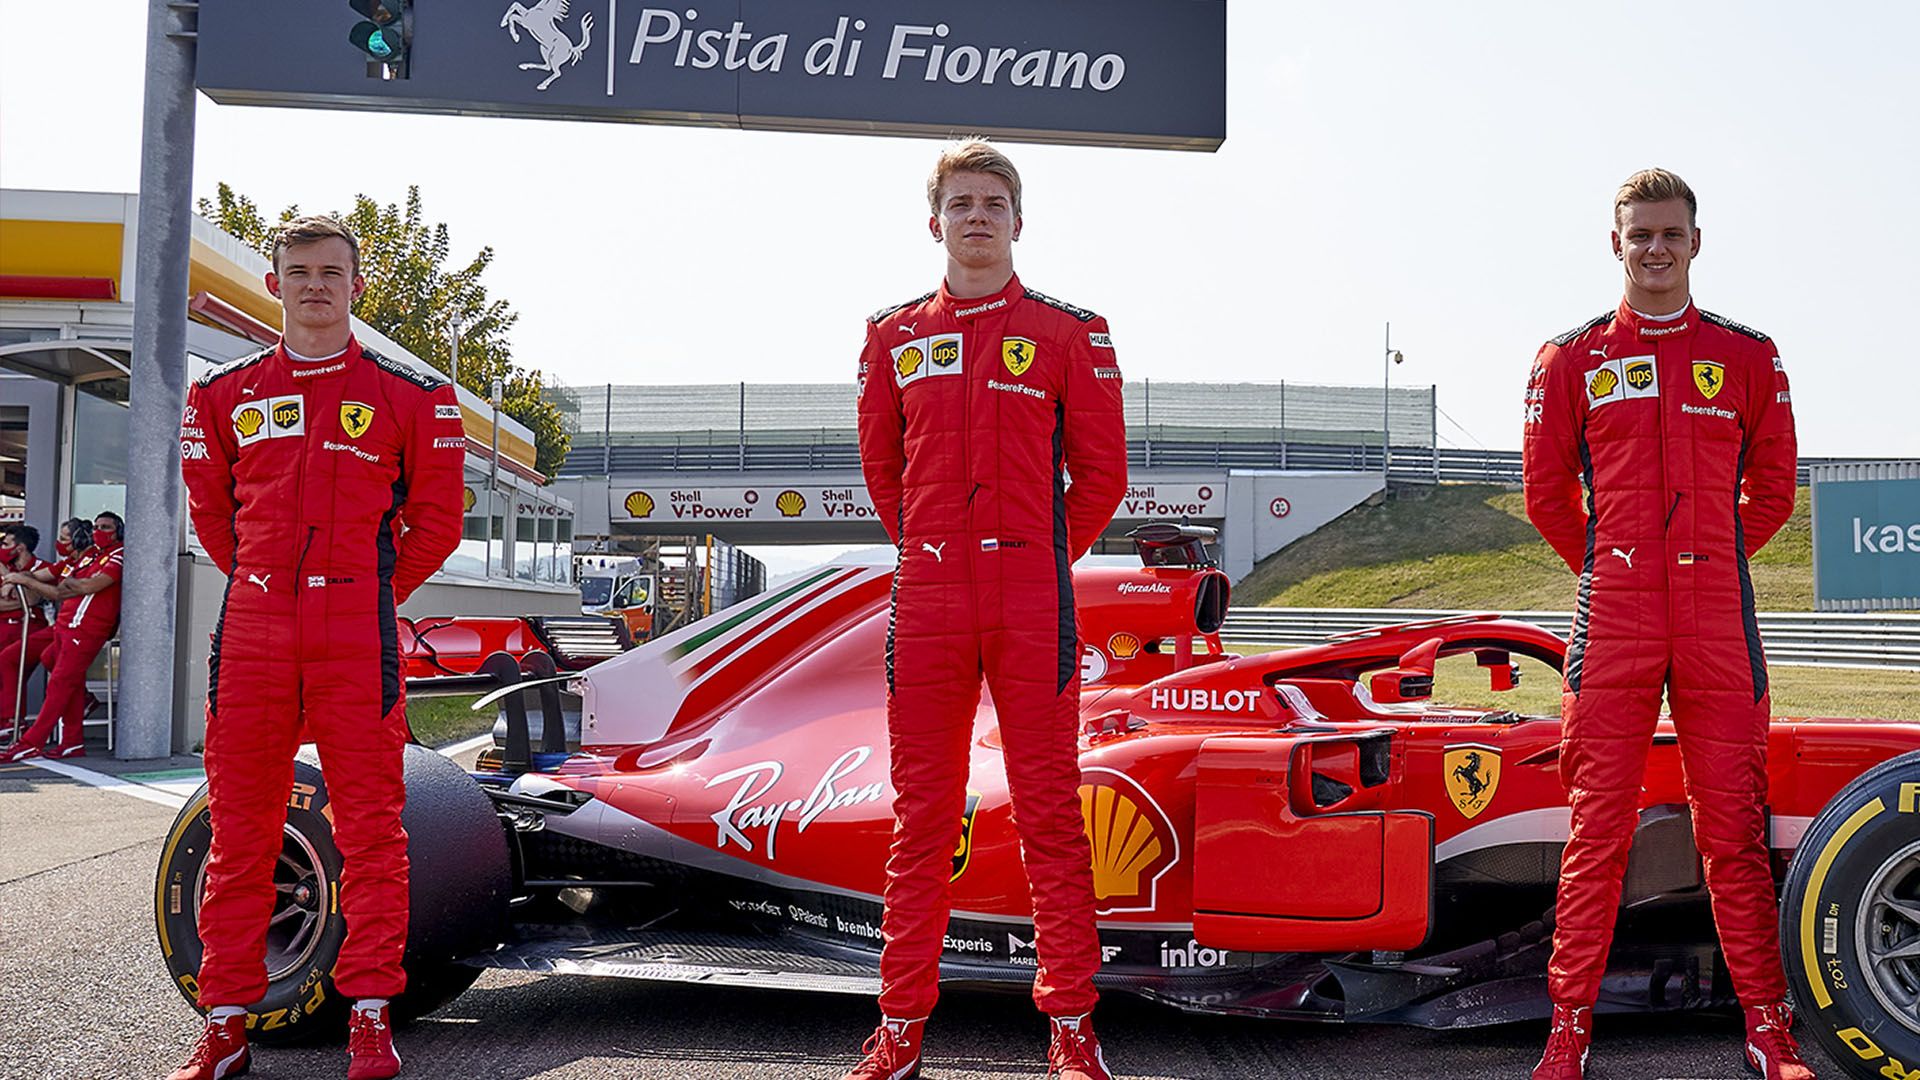 Ferrari to decide which junior driver will get 2021 F1 chance in 'next couple of weeks' says Binotto. Formula 1®